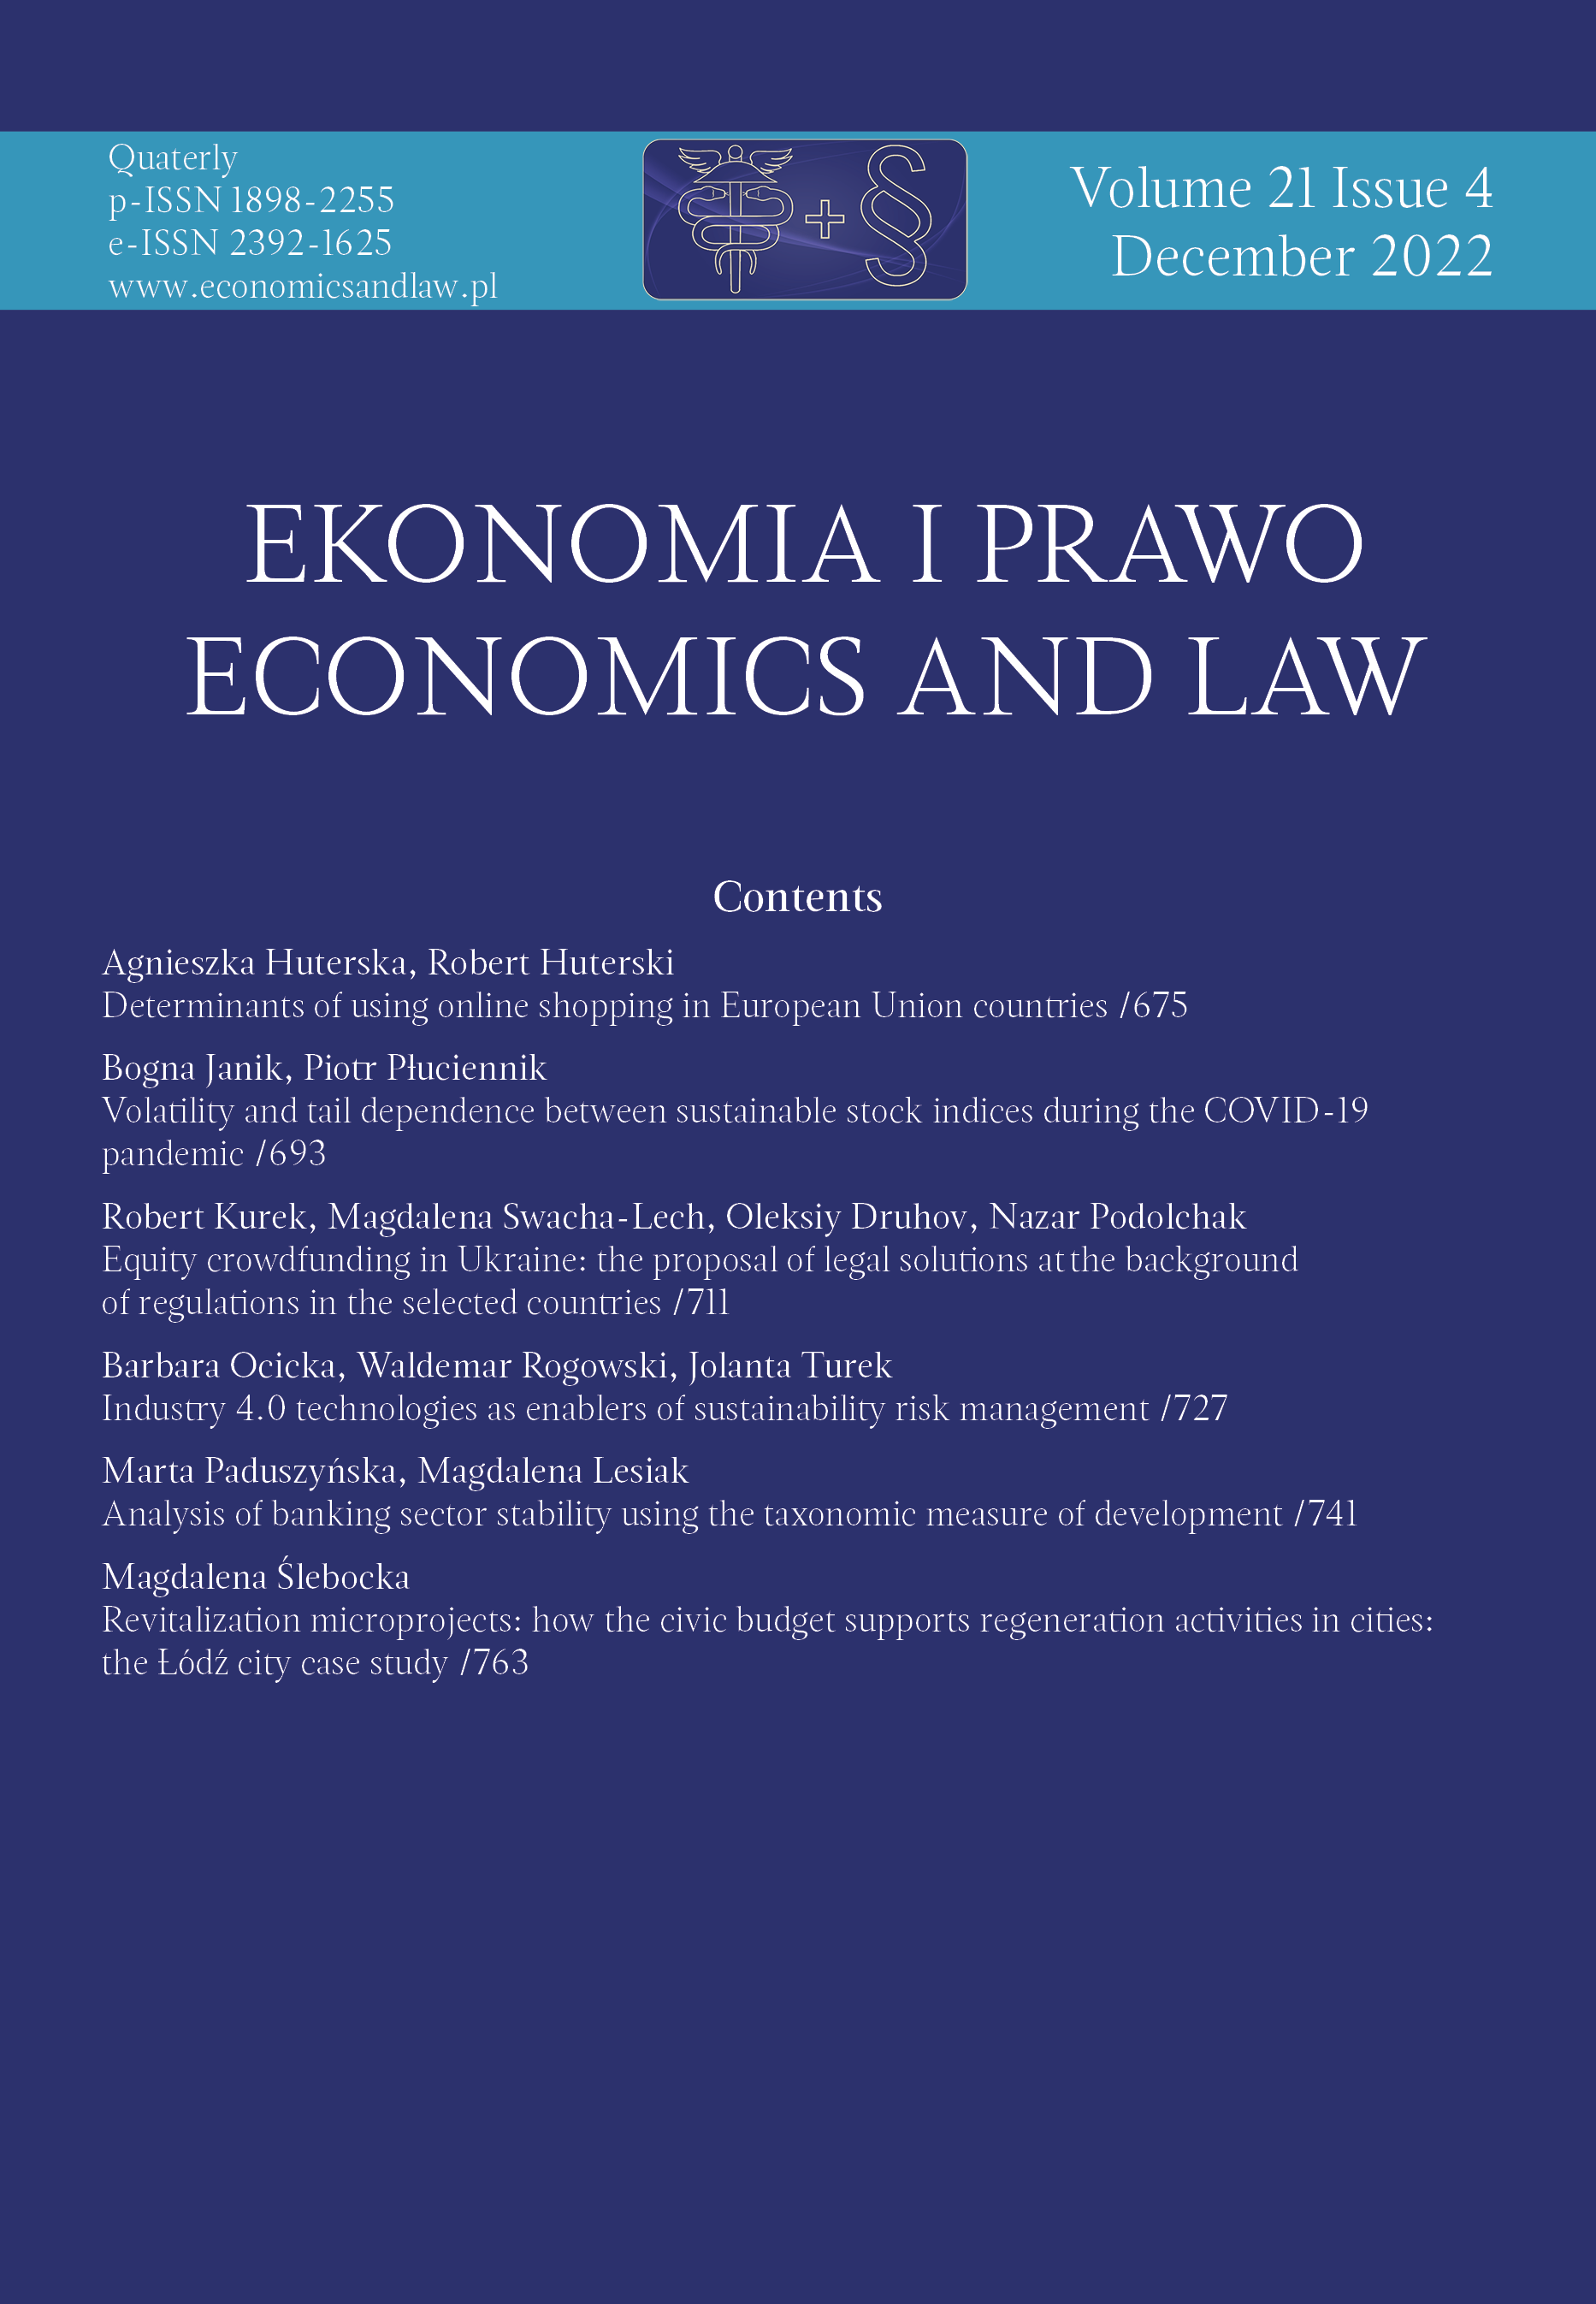 Analysis of banking sector stability using the taxonomic measure of development Cover Image